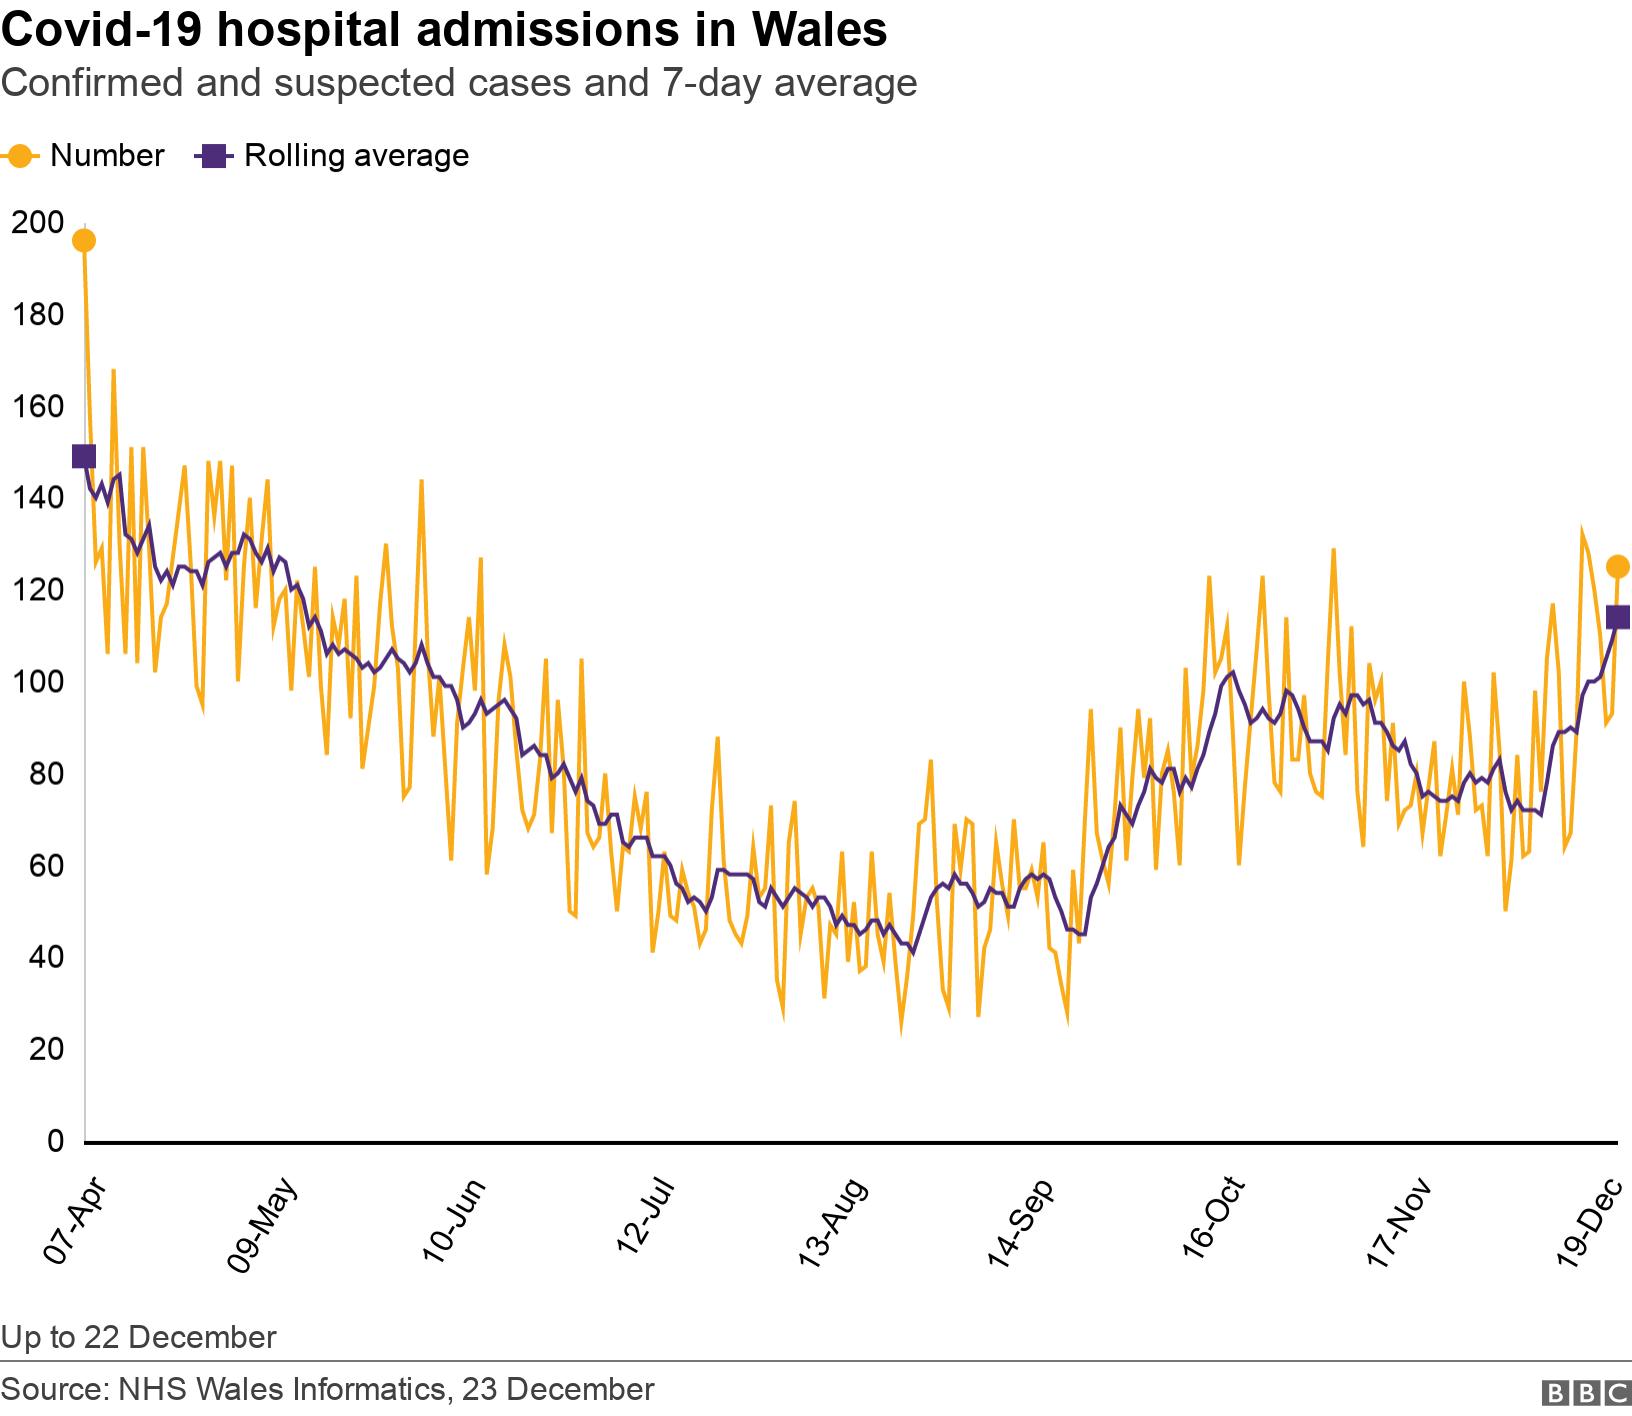 Covid-19 hospital admissions in Wales. Confirmed and suspected cases and 7-day average. Up to 22 December.